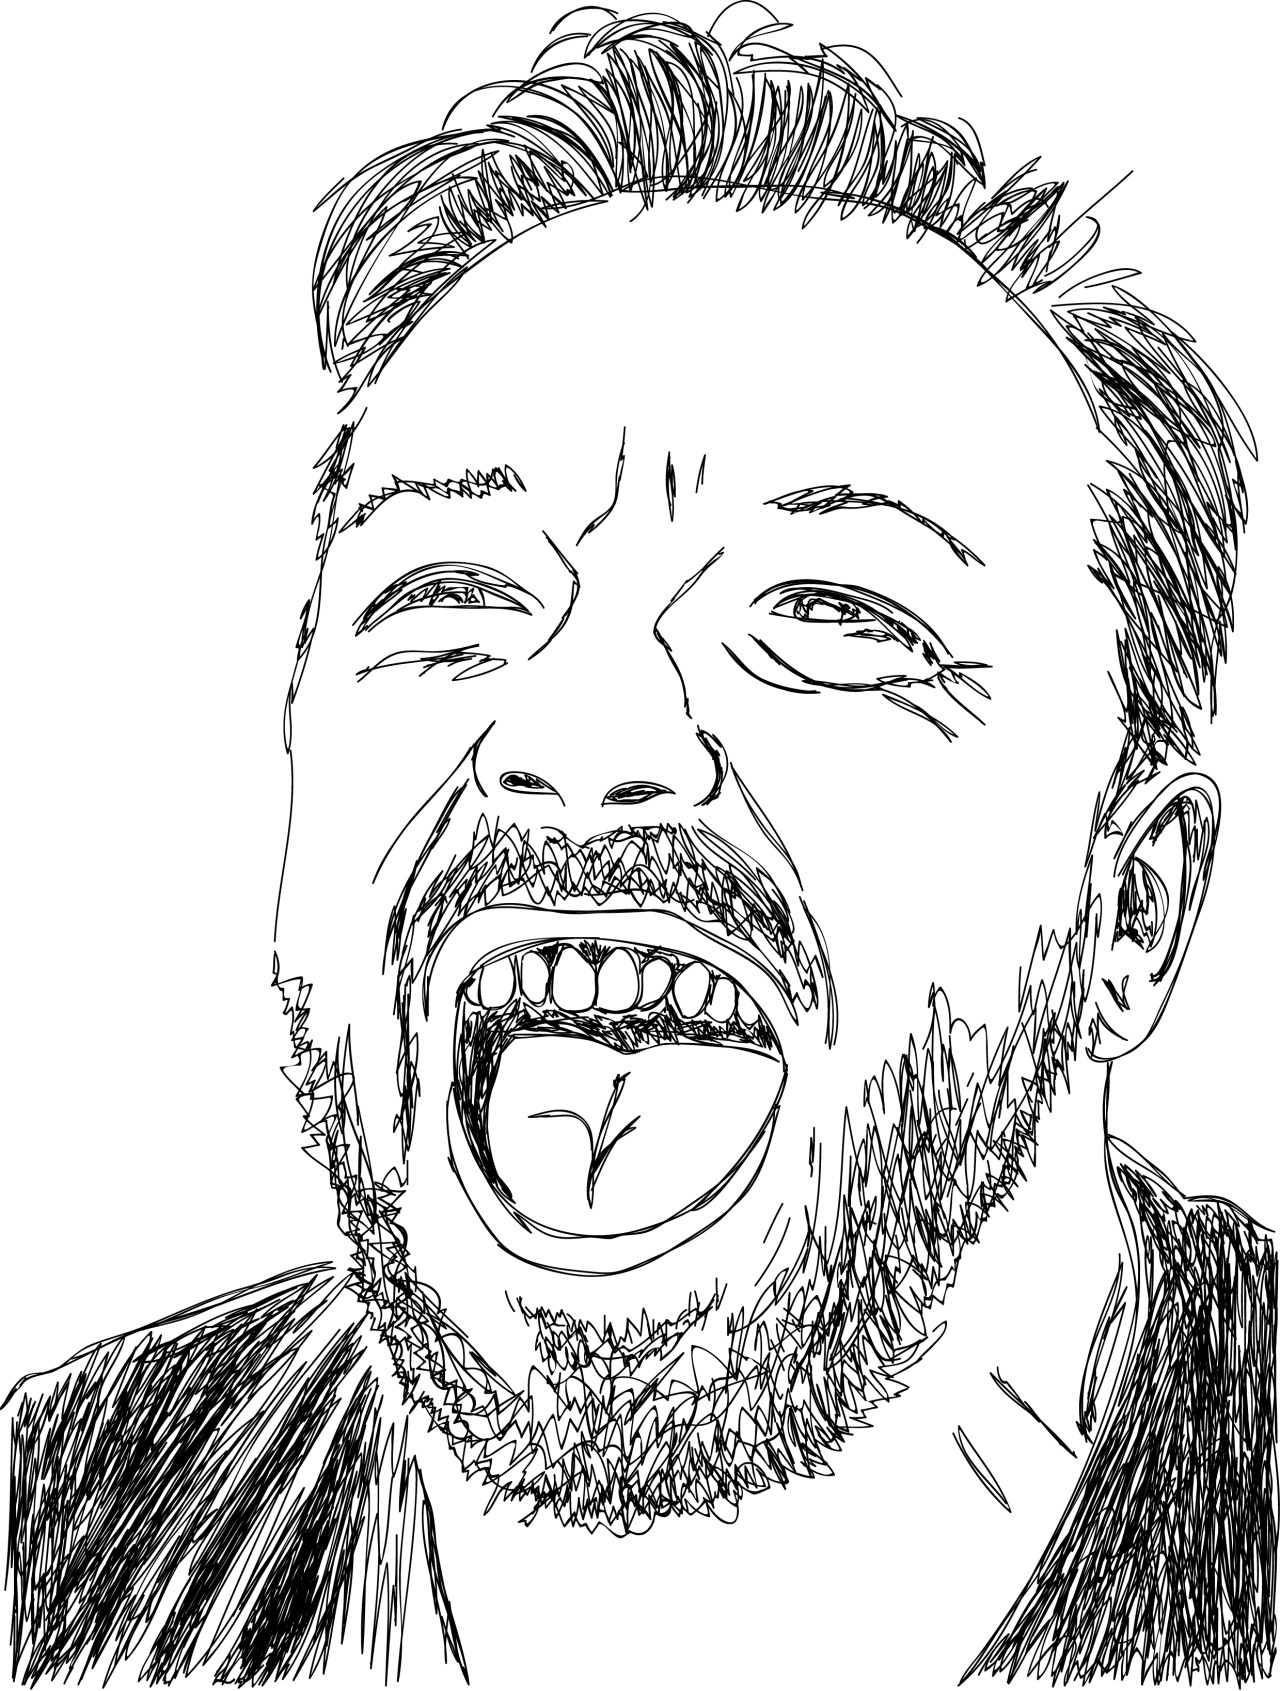 In my spare time I like to scribble… a lot. One of my favourites is my Ricky Gervais portrait which I’m really happy to share. You can find more on my wordpress. tezzawiggy.wordpress.com